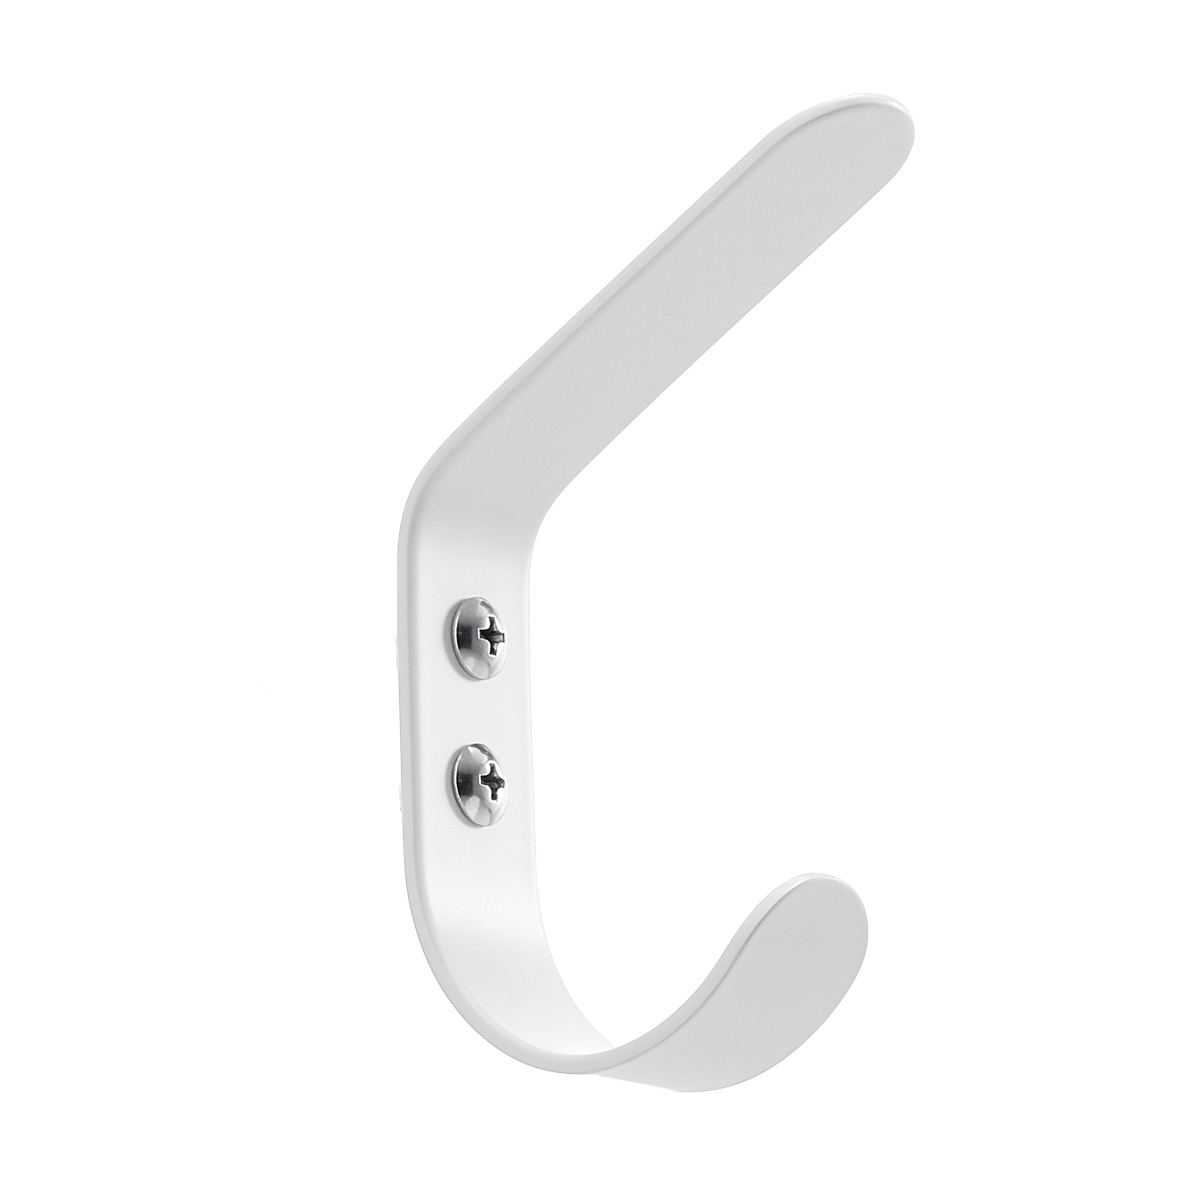 https://www.containerstore.com/catalogimages/488249/10091944-tcs-double-j-hook-matte-whi.jpg